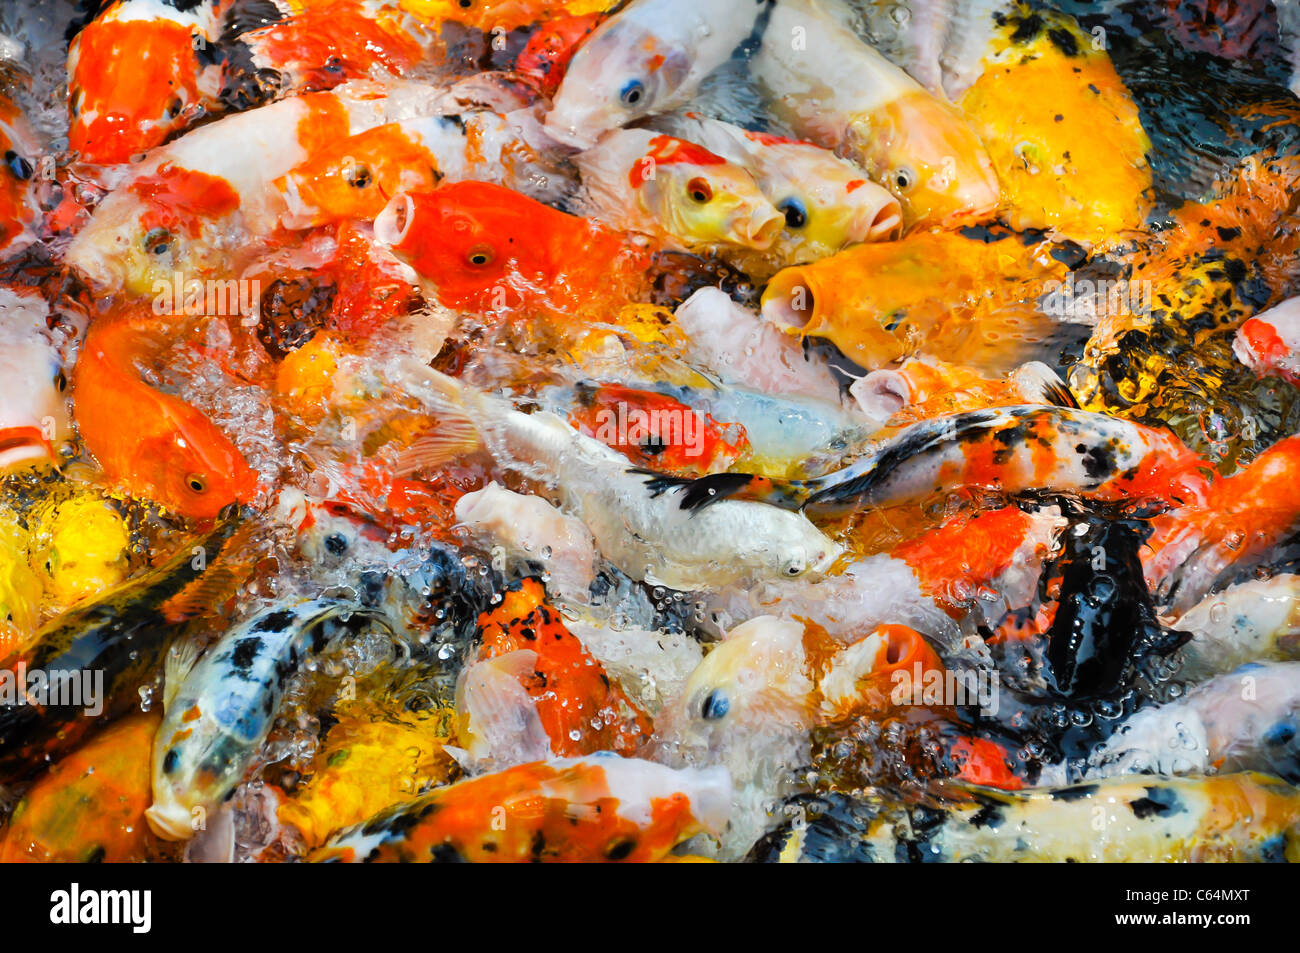 a school of colorful koi carps surfaces in a feeding frenzy Stock Photo